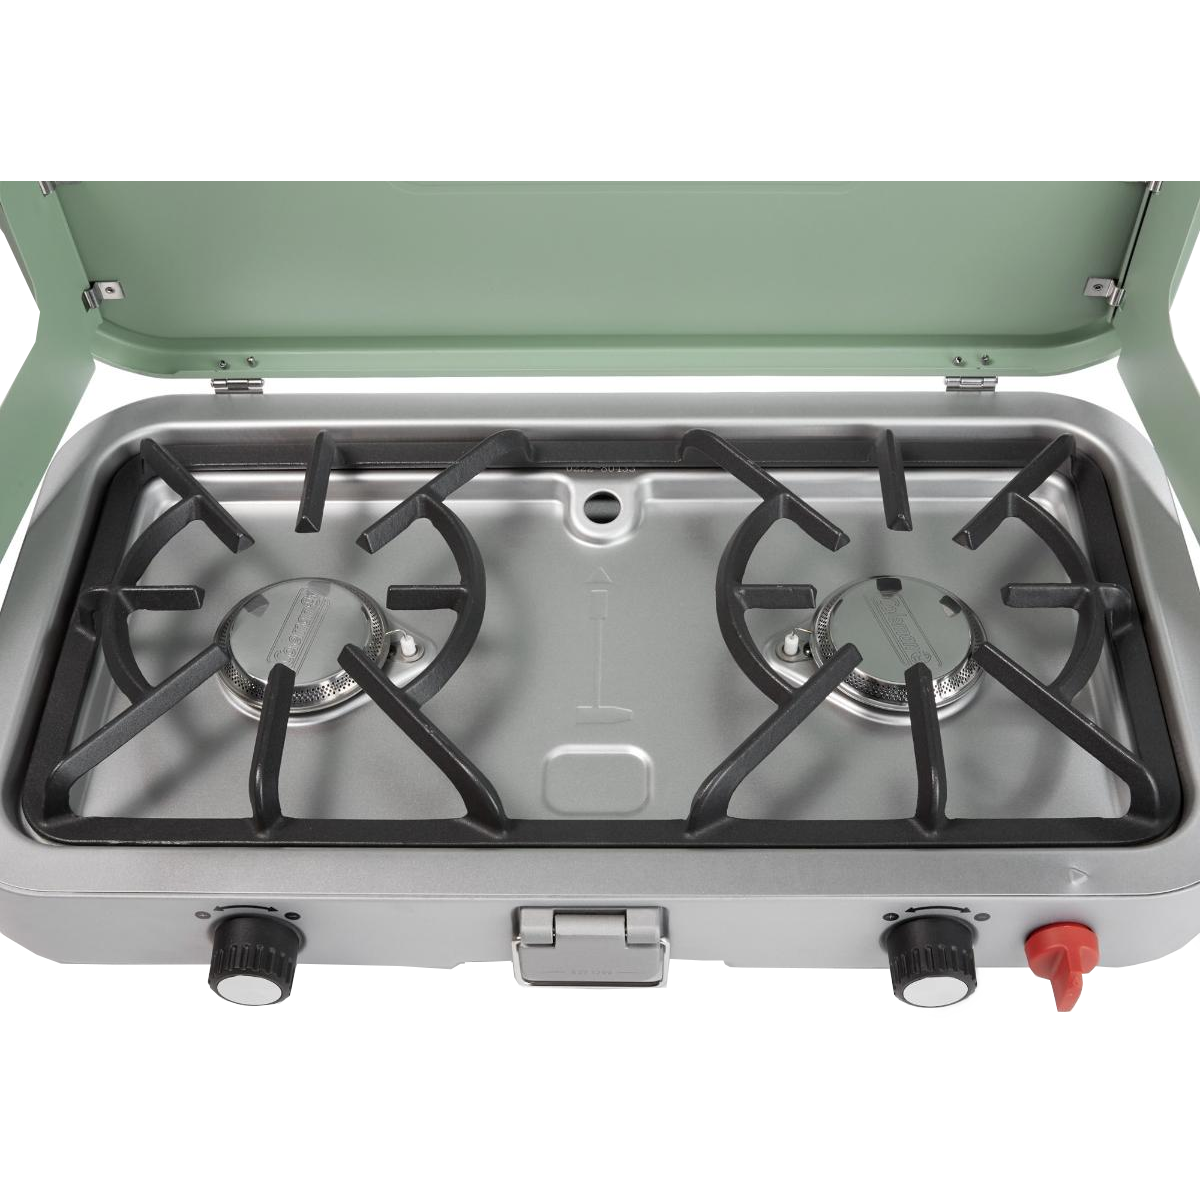 Cascade™ Classic Camping Stove